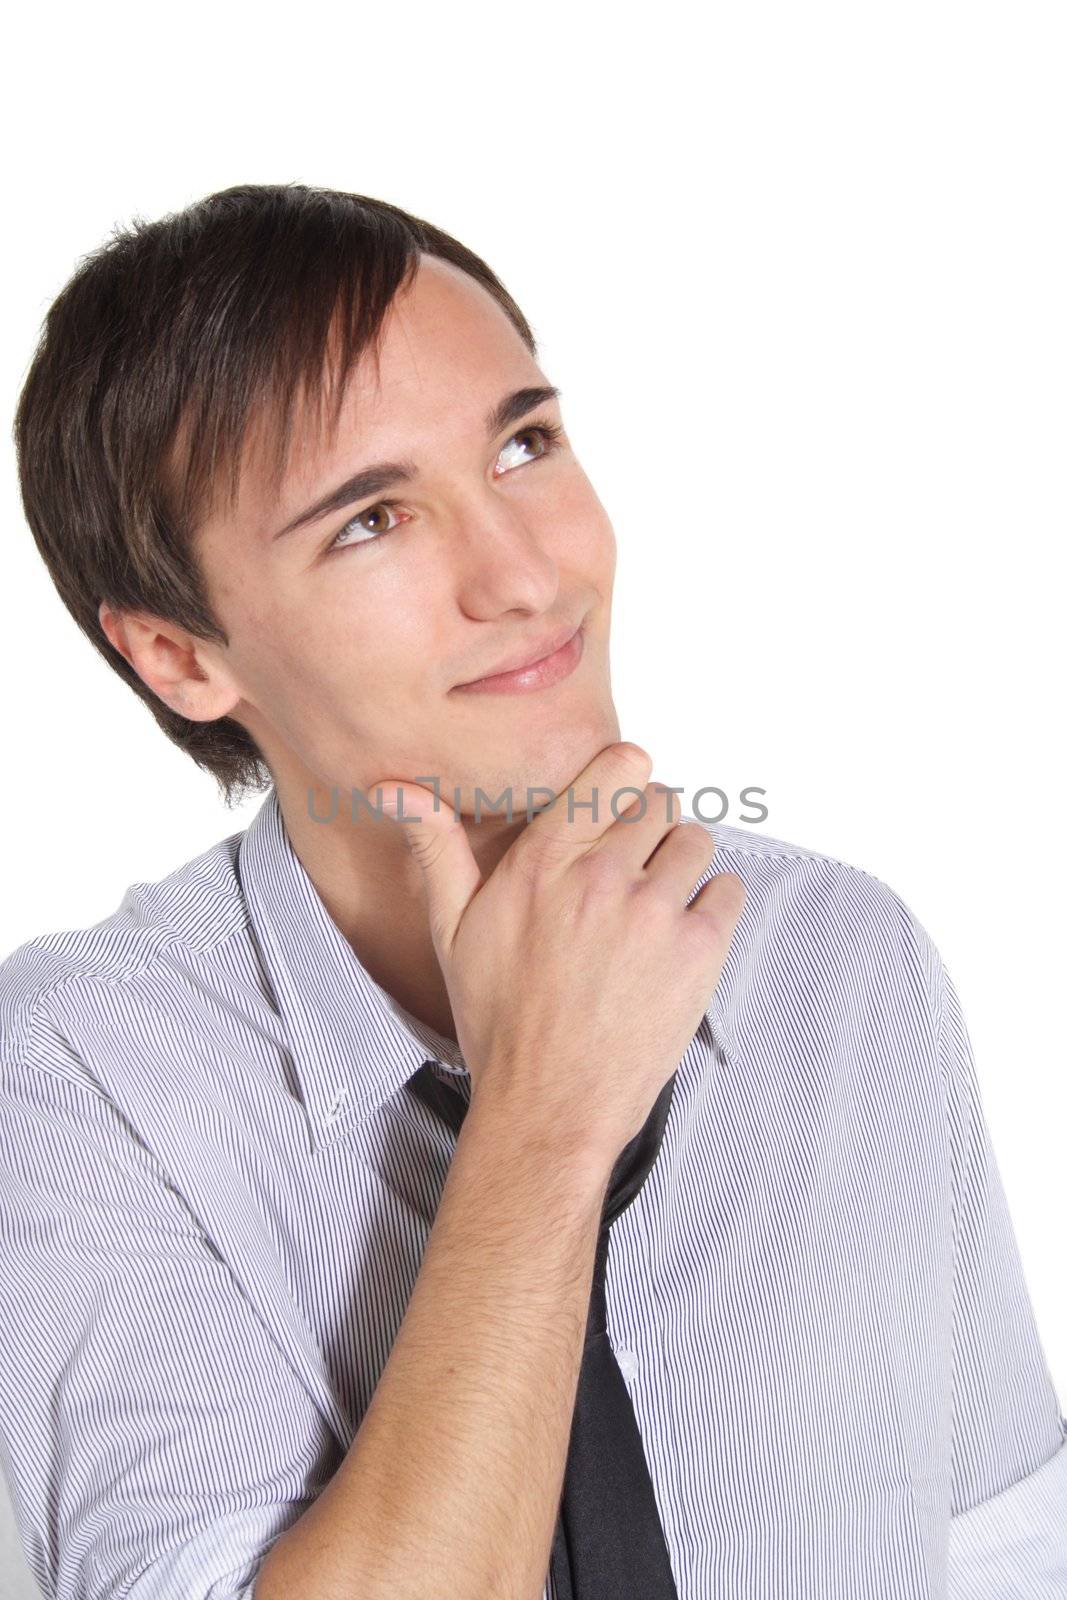 A handsome young man deliberates a decision. All isolated on white background.